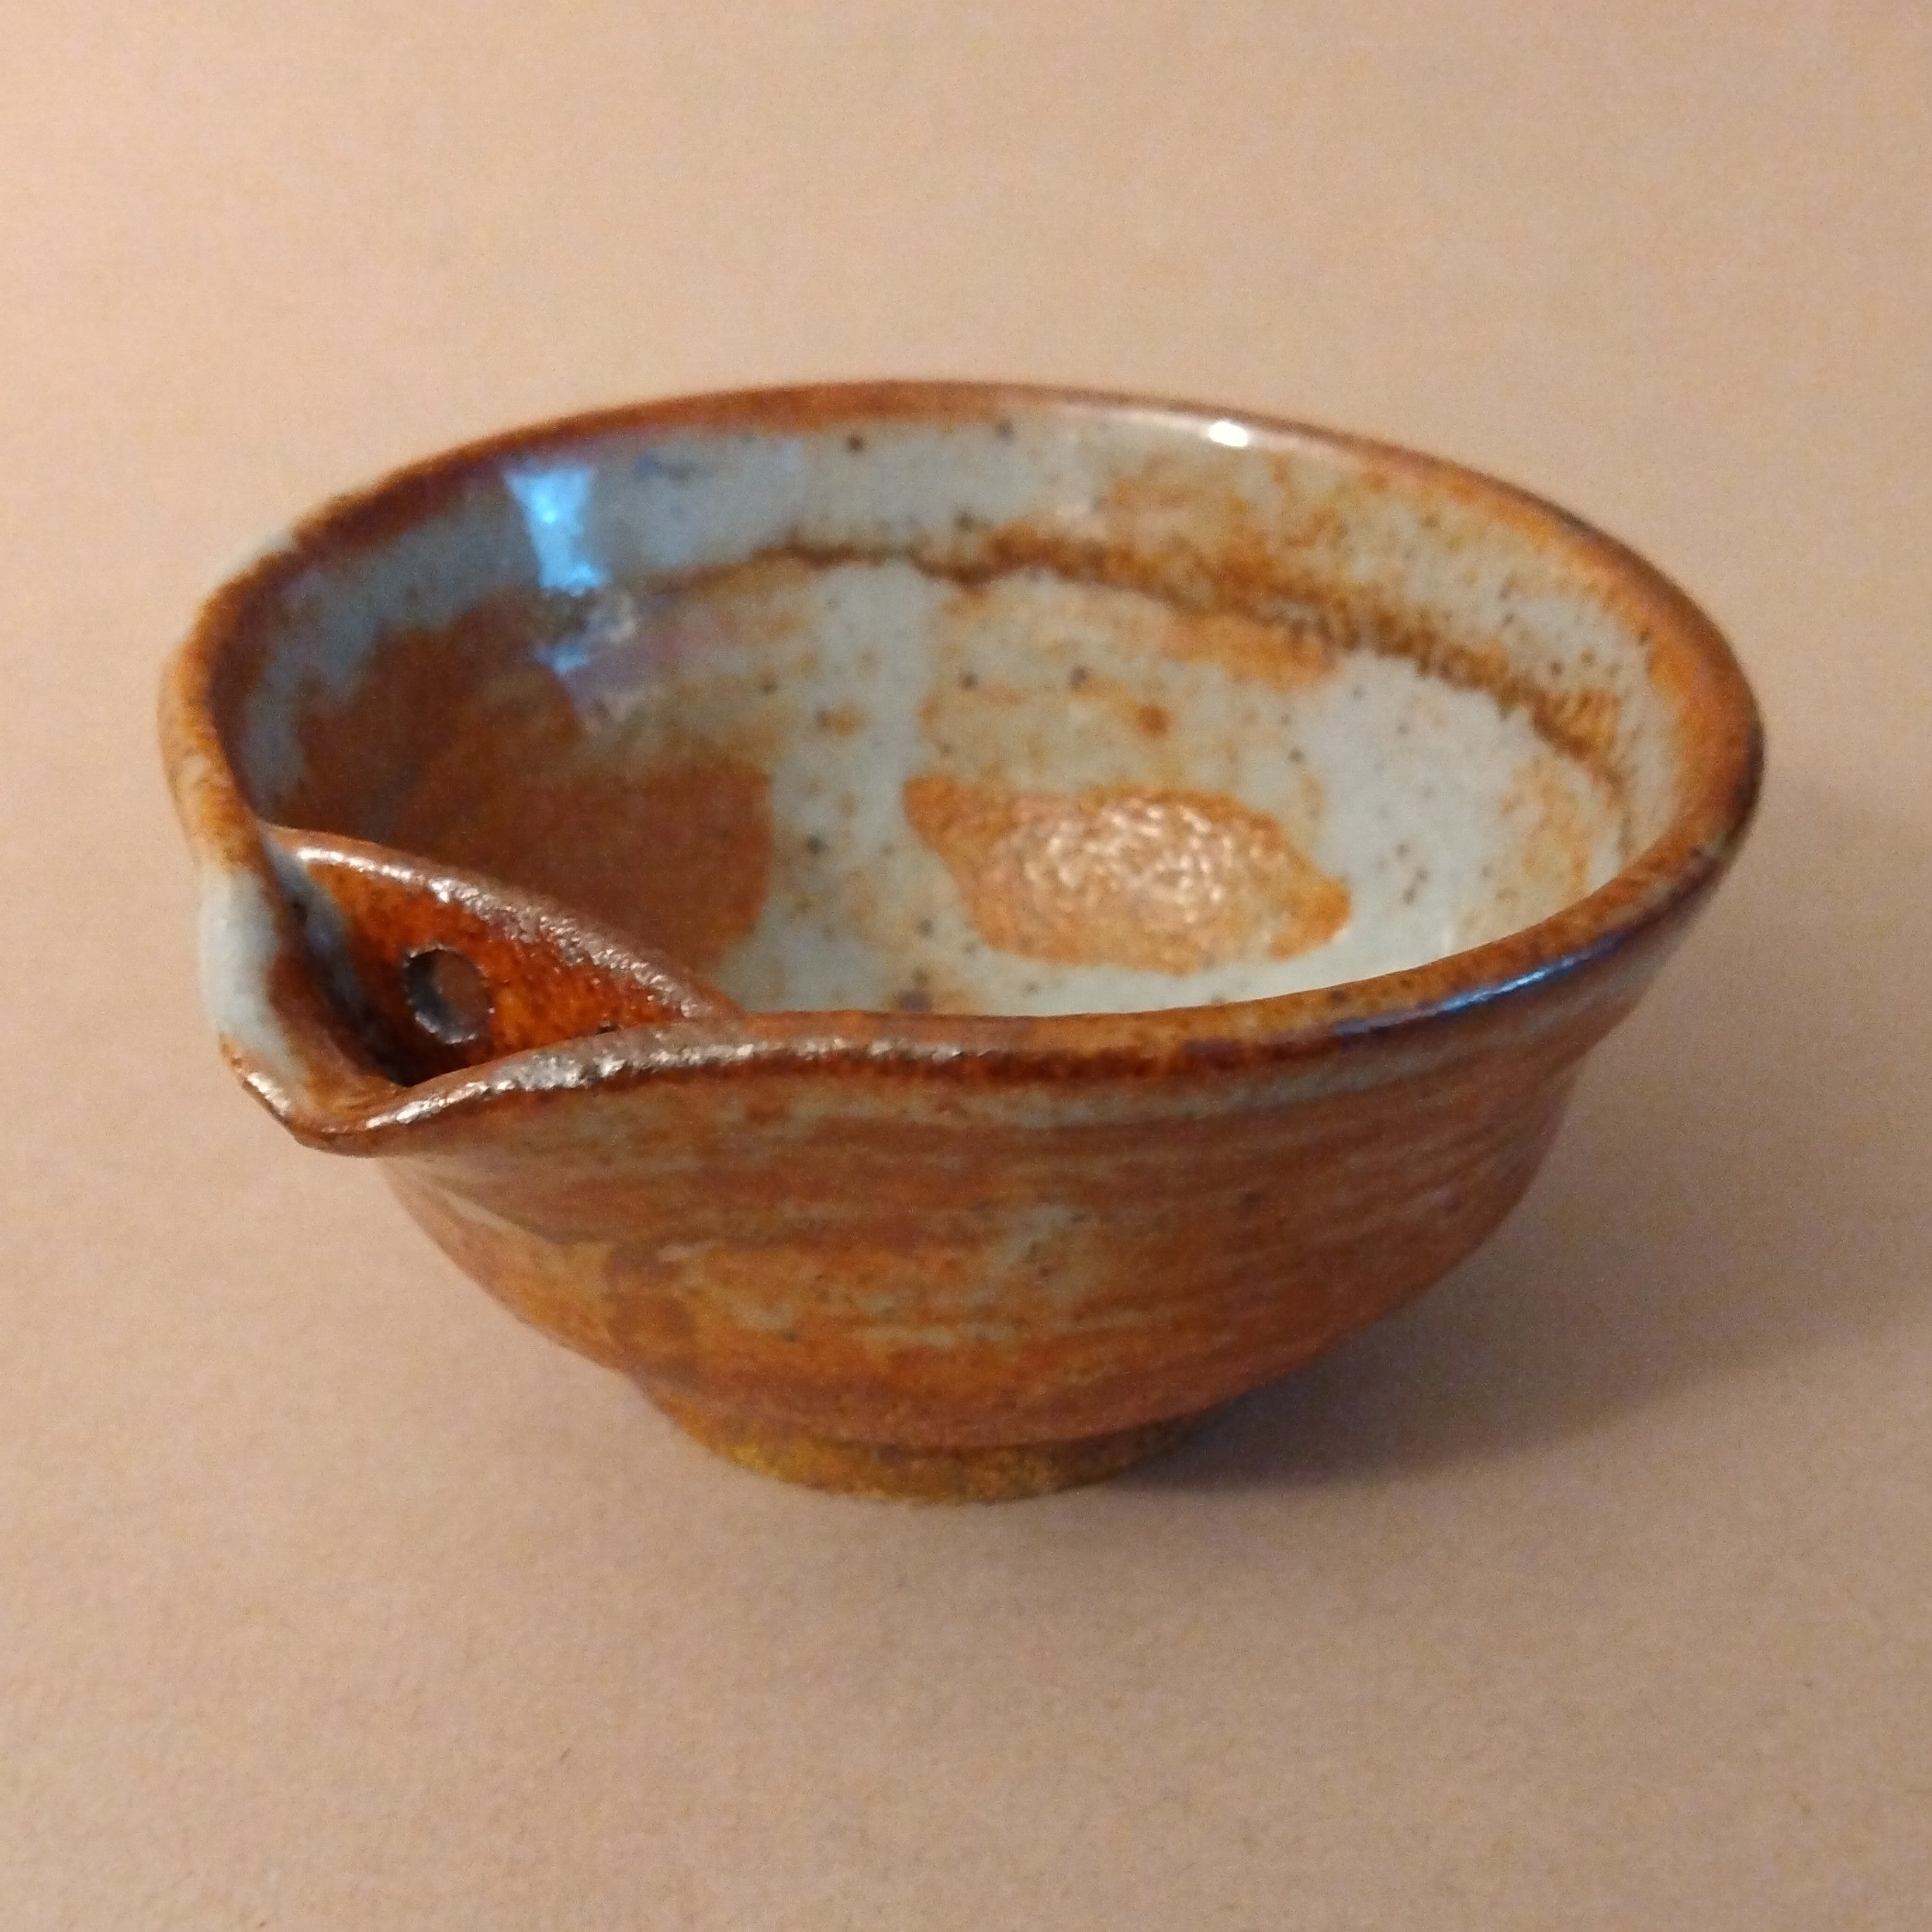 Katakuchi, Spouted Bowl, with built-in strainer, by George Gledhill